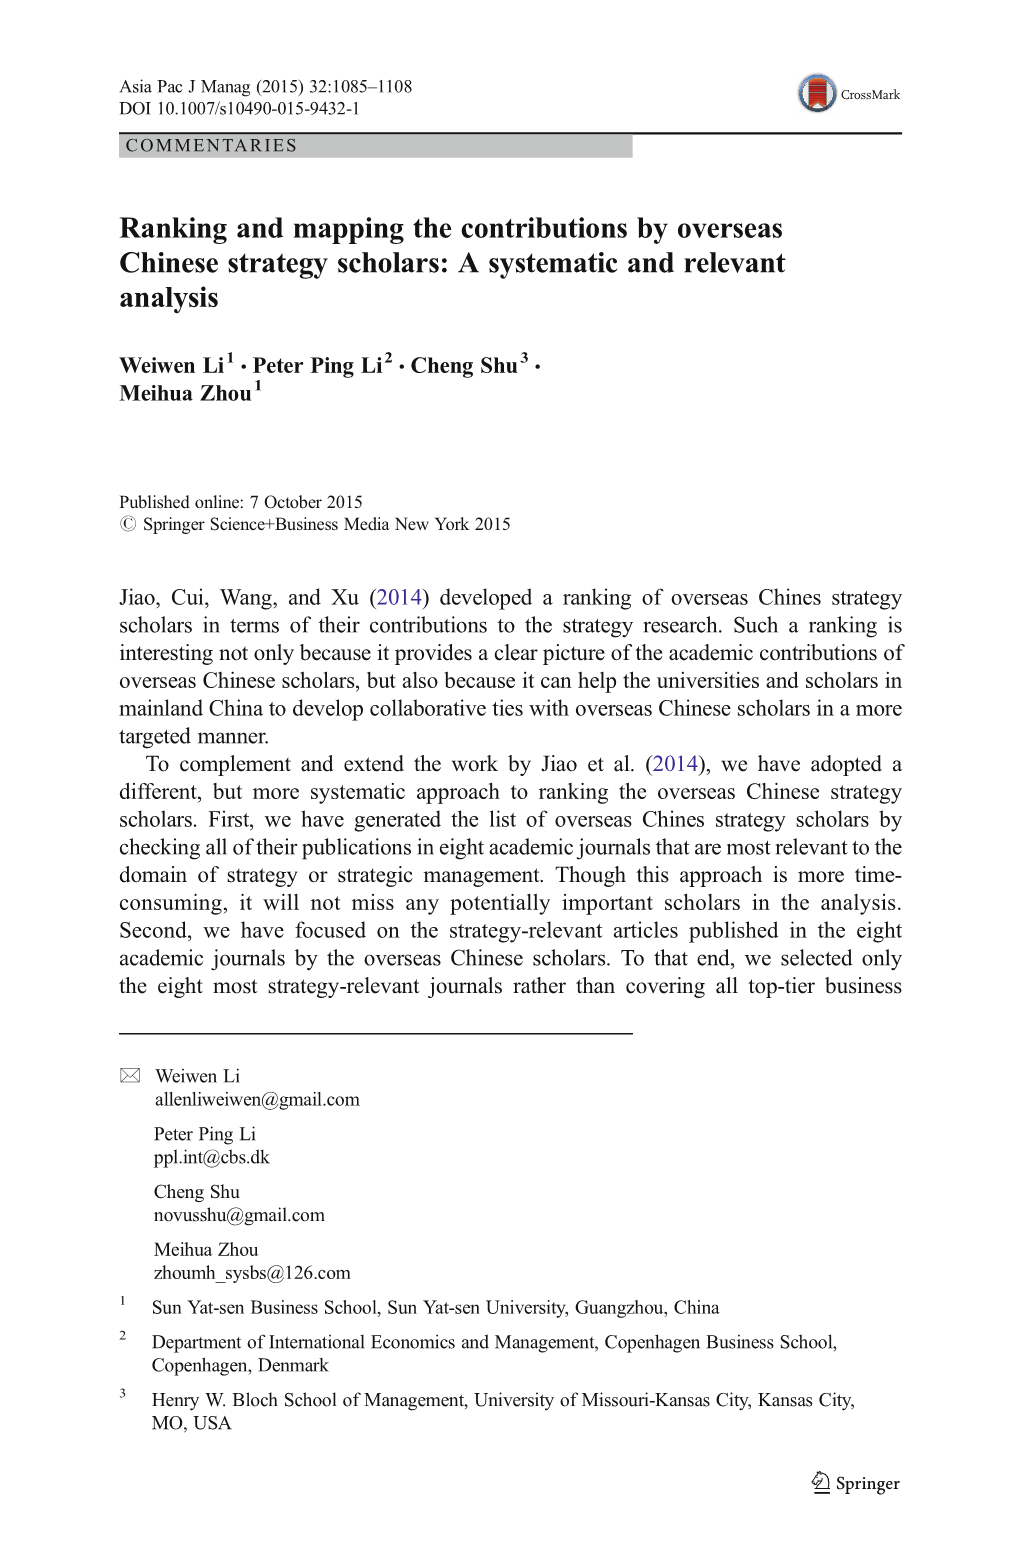 Ranking and Mapping the Contributions by Overseas Chinese Strategy Scholars: a Systematic and Relevant Analysis